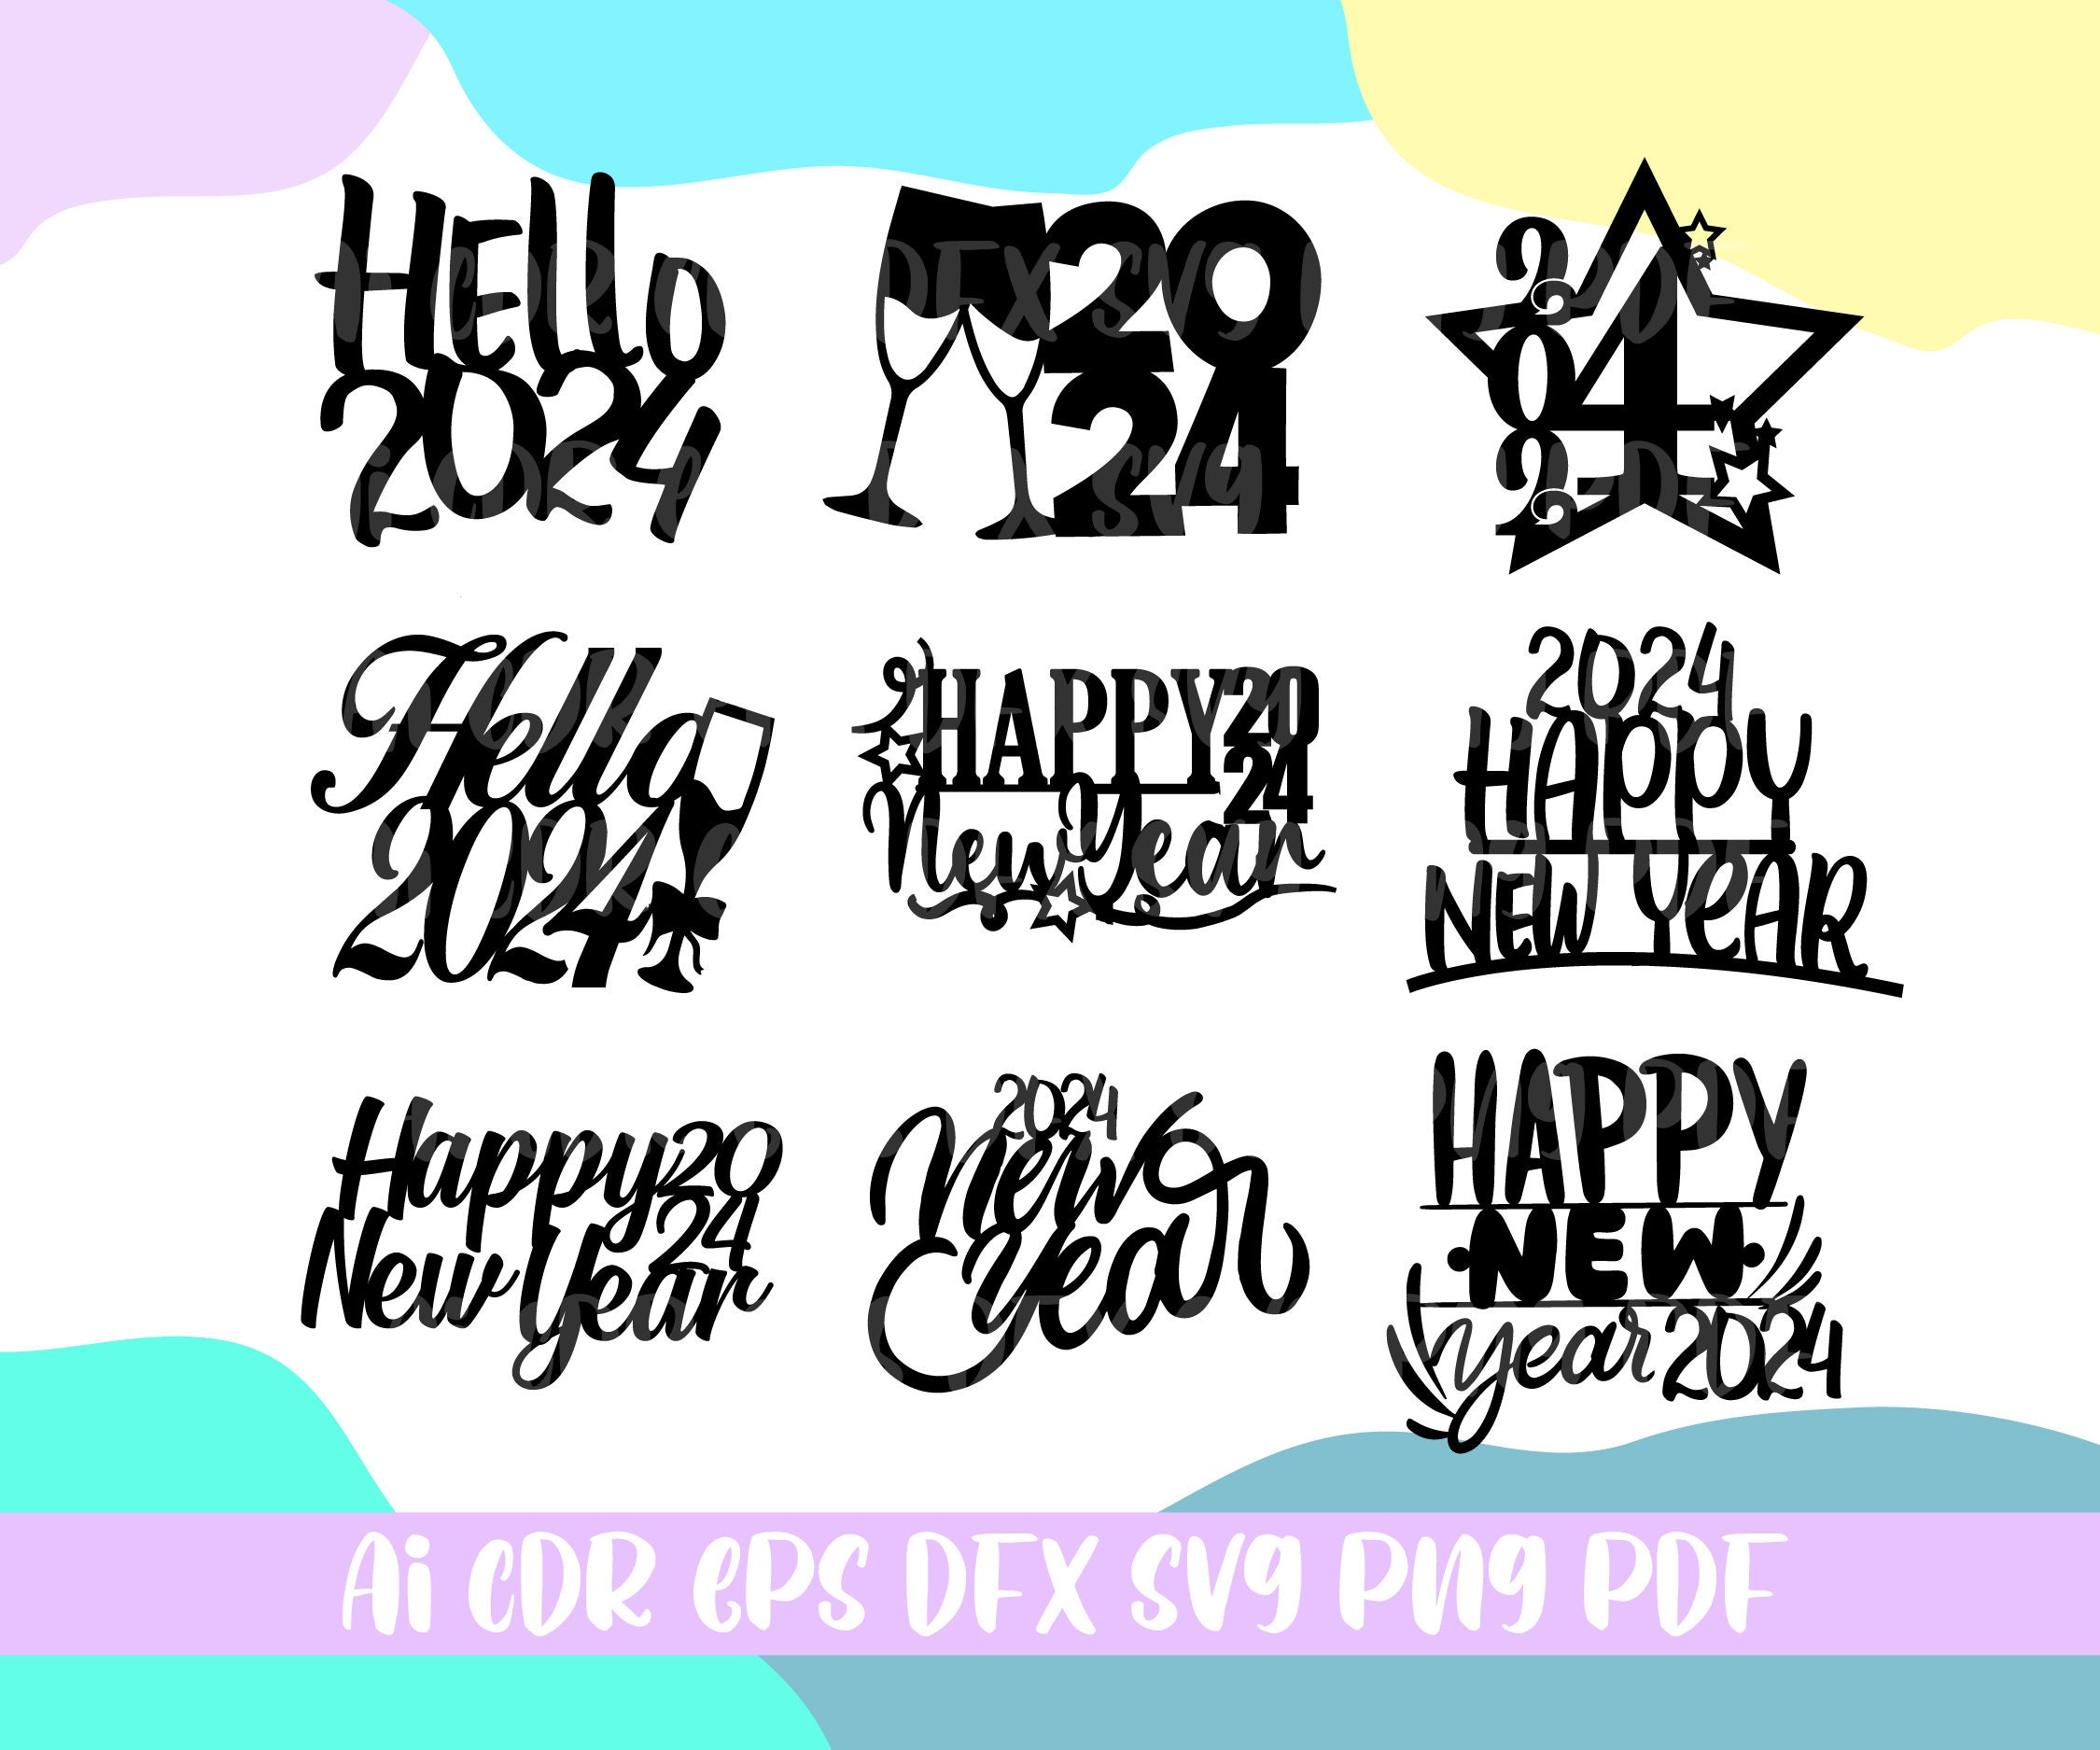 Happy New Year Cake Topper SVG Bundle Hello 2024 SVG New Years Cake Topper  Bundle 2024 Cake Topper Svg Laser Cut Files 